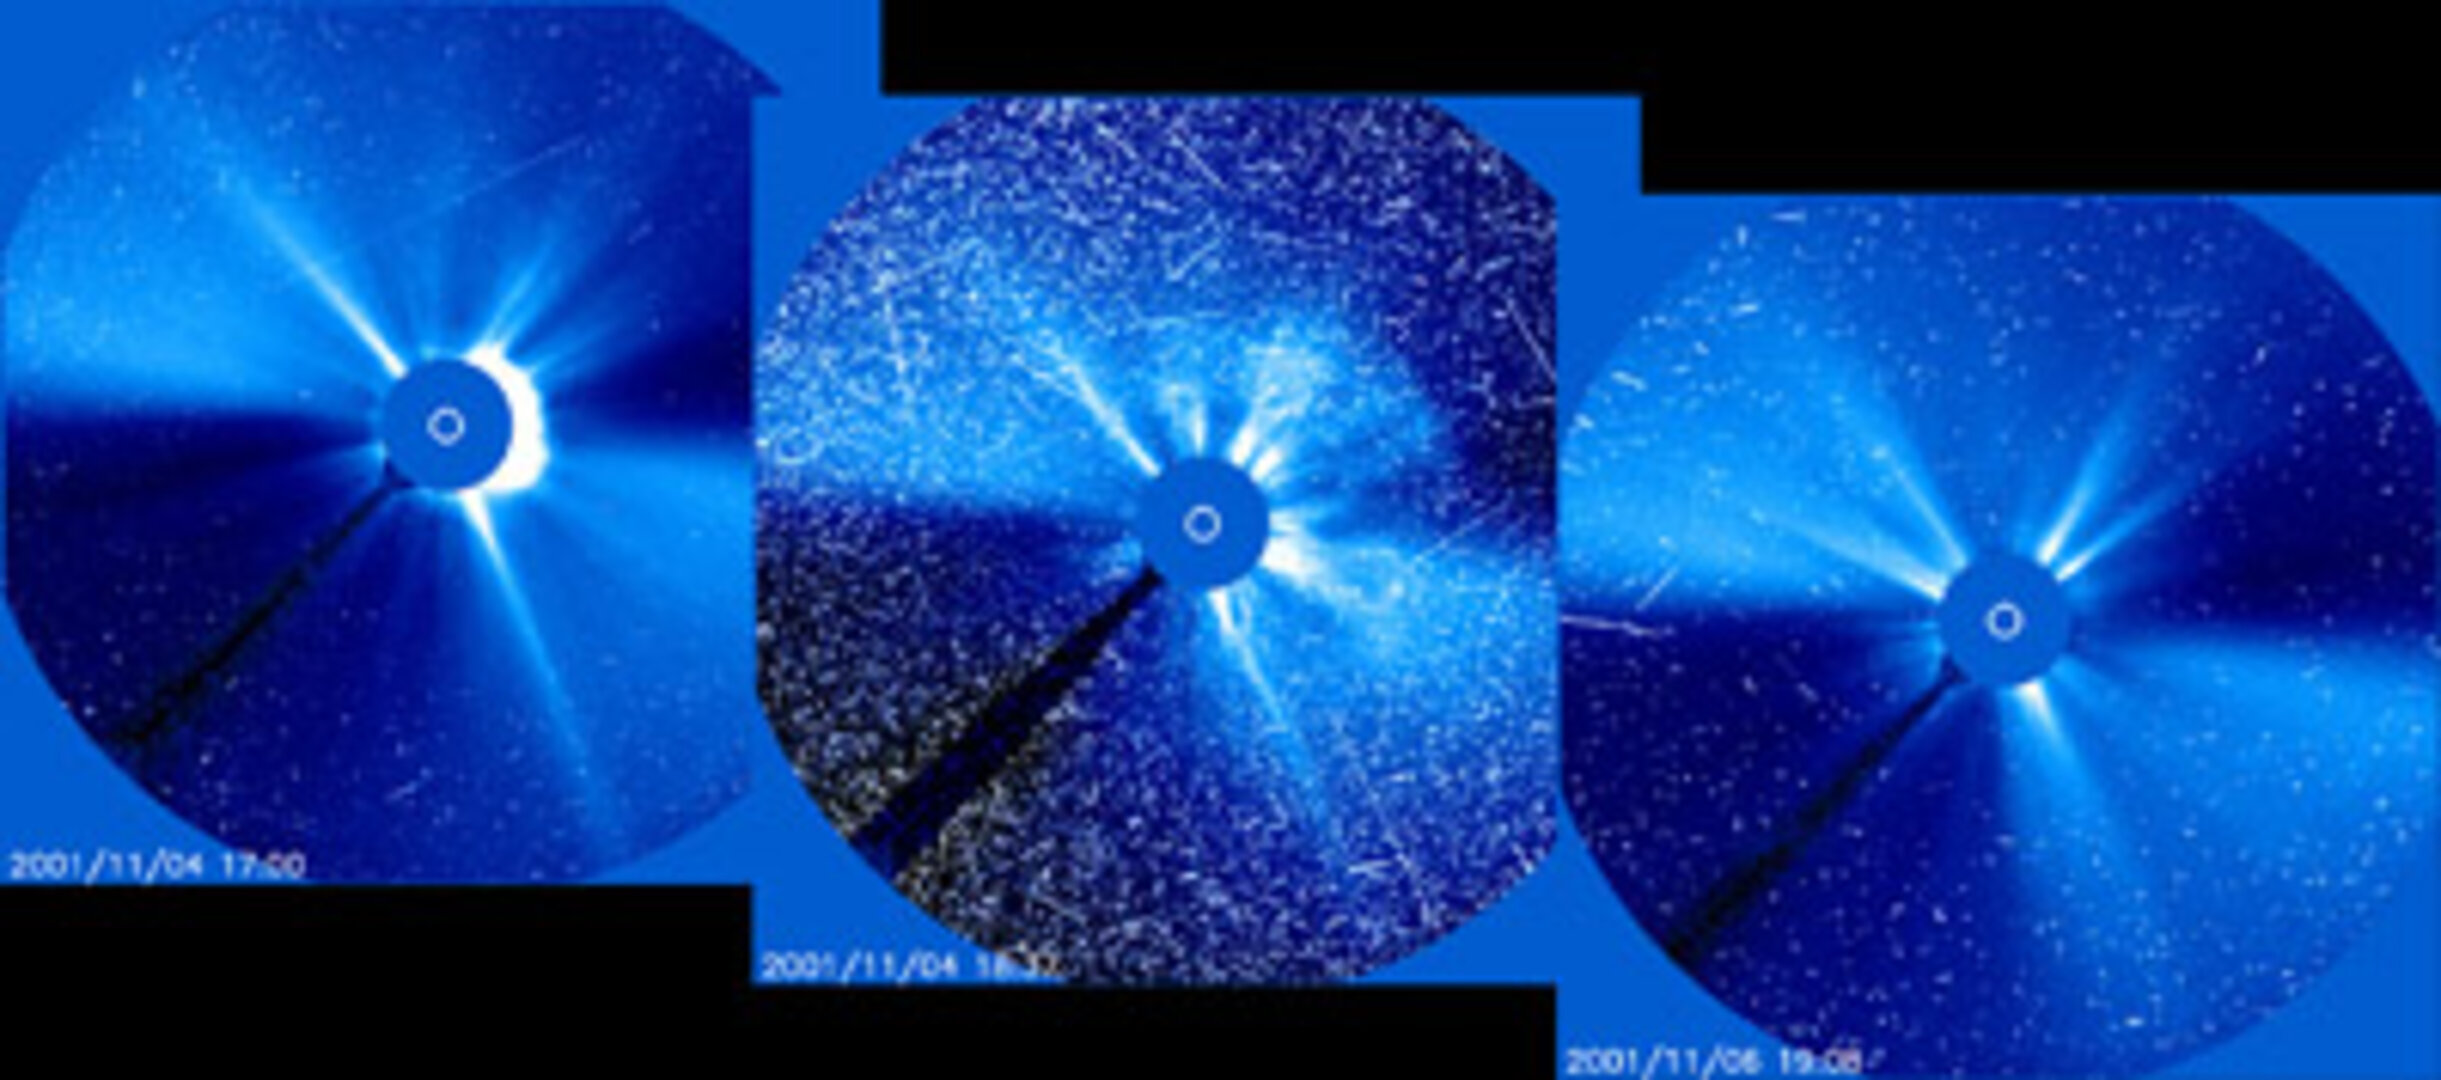 SOHO images showing the solar storm